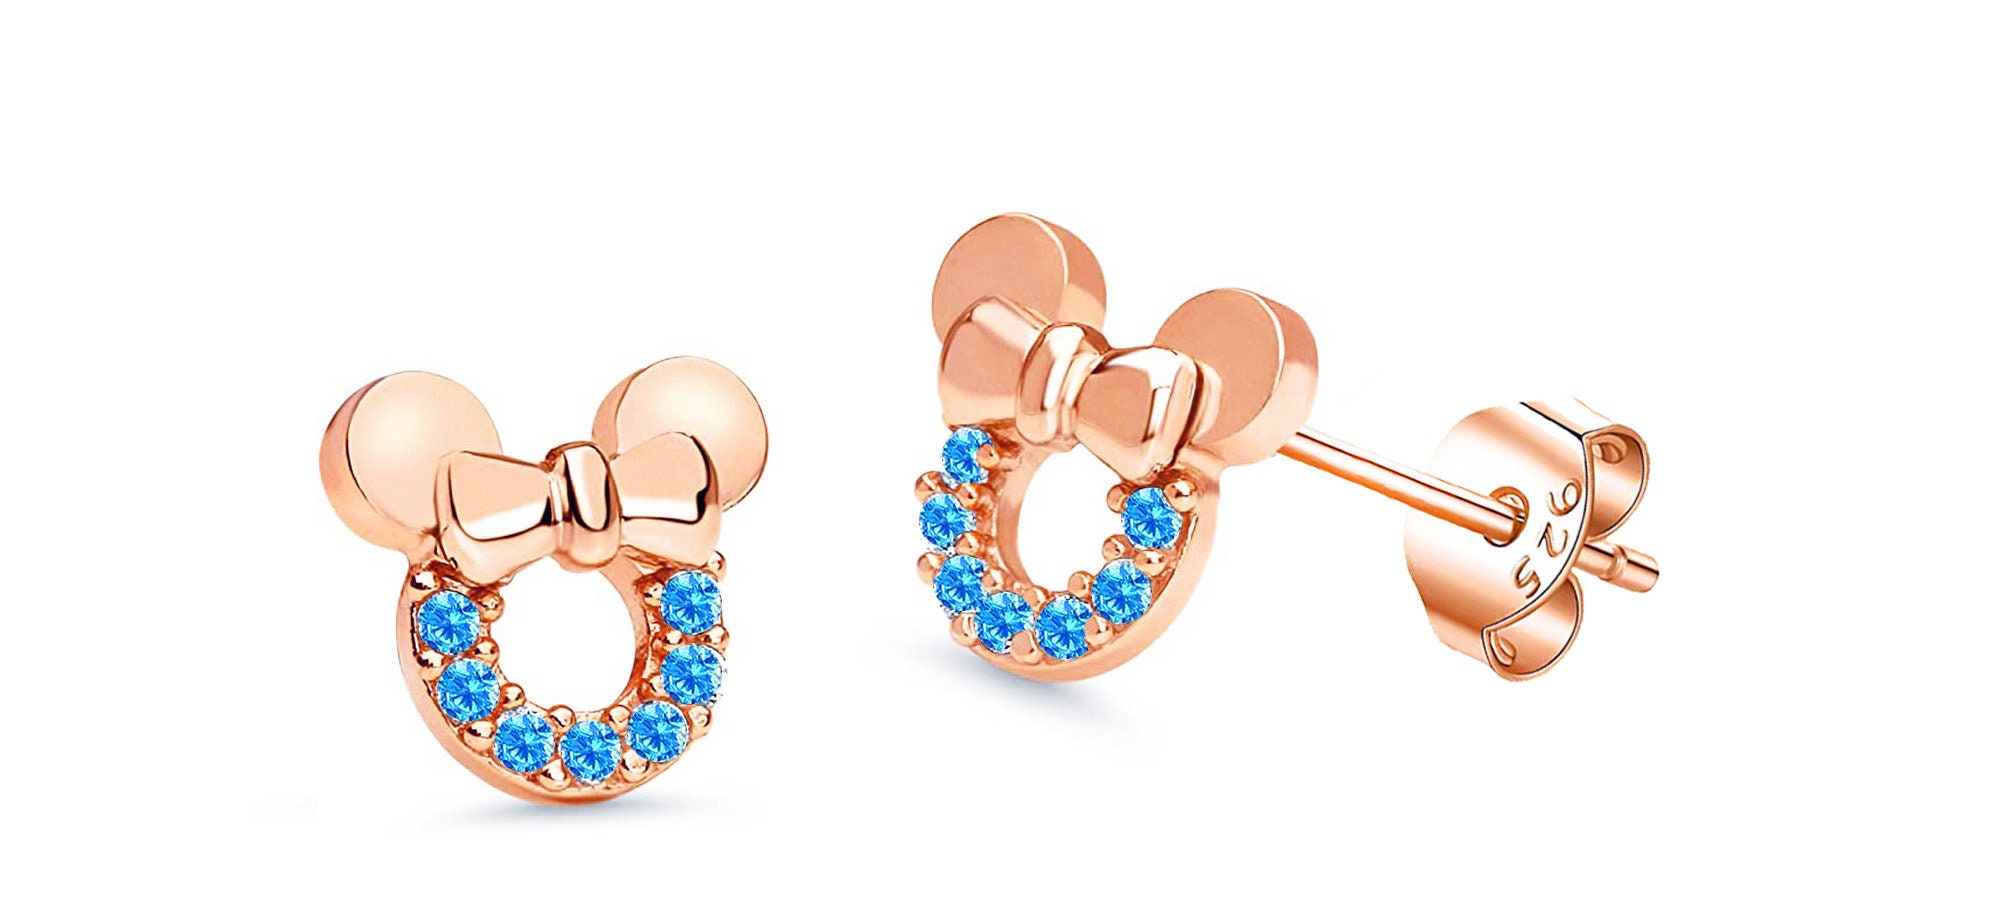 Swarovski Crystal Mickey Mouse Stud Earrings in Rose Gold-Plated Metal |  Ross-Simons